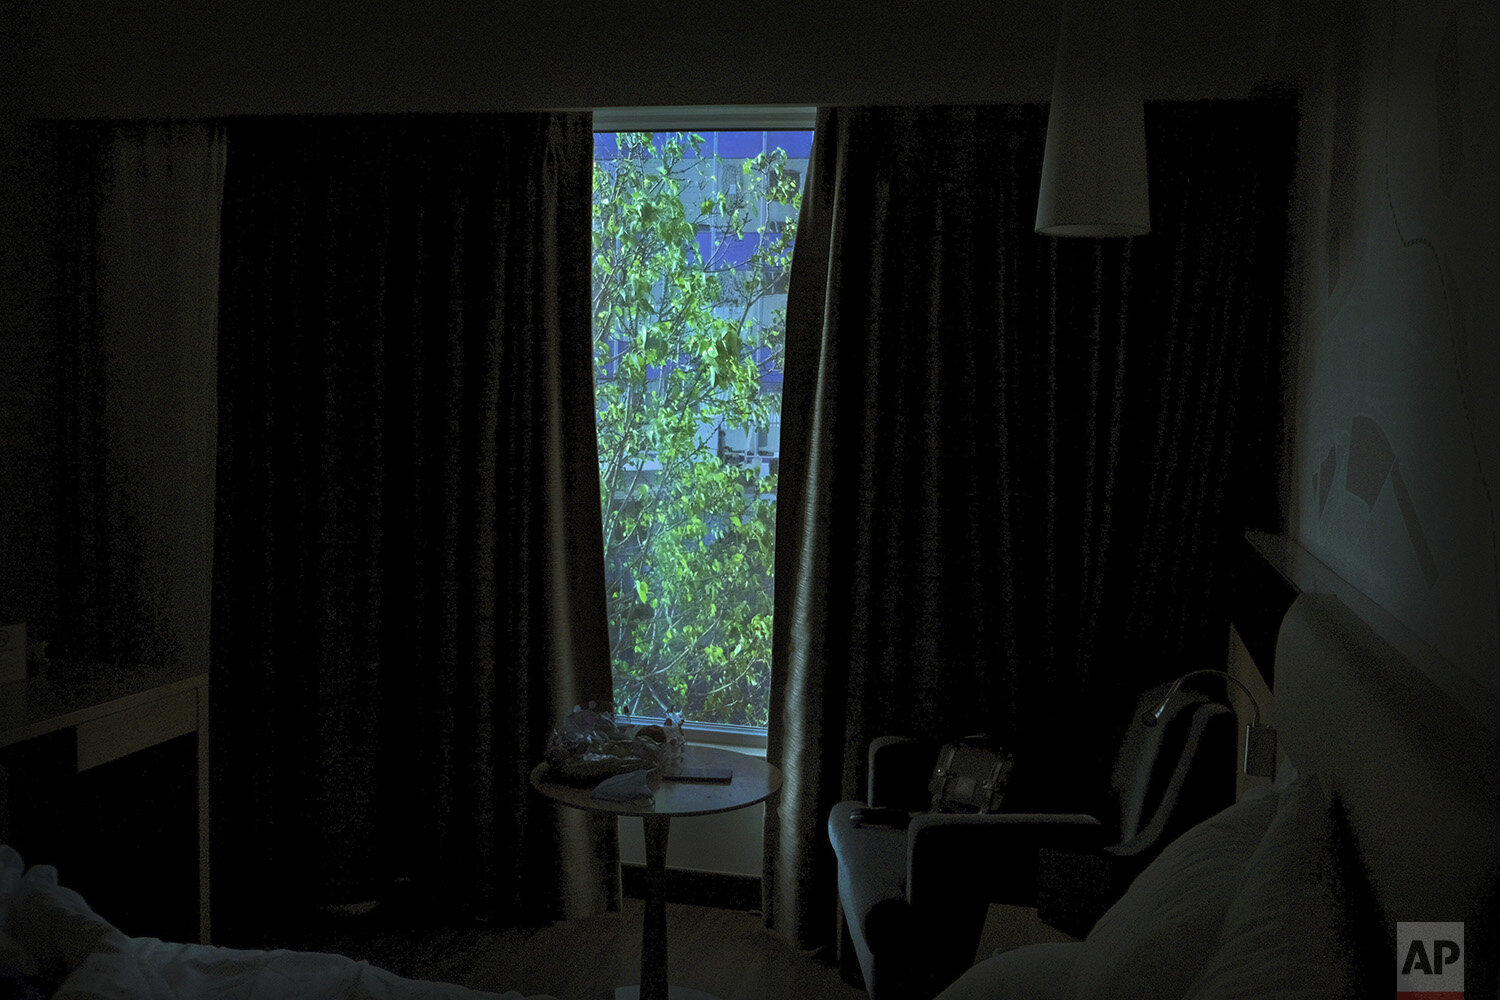  In this April 23, 2020, photo, a tree is seen from the window of a hotel room where Associated Press photographer Rafiq Maqbool has been placed under quarantine in Mumbai, India. Maqbool was tested positive for COVID-19 with dozens of other journali